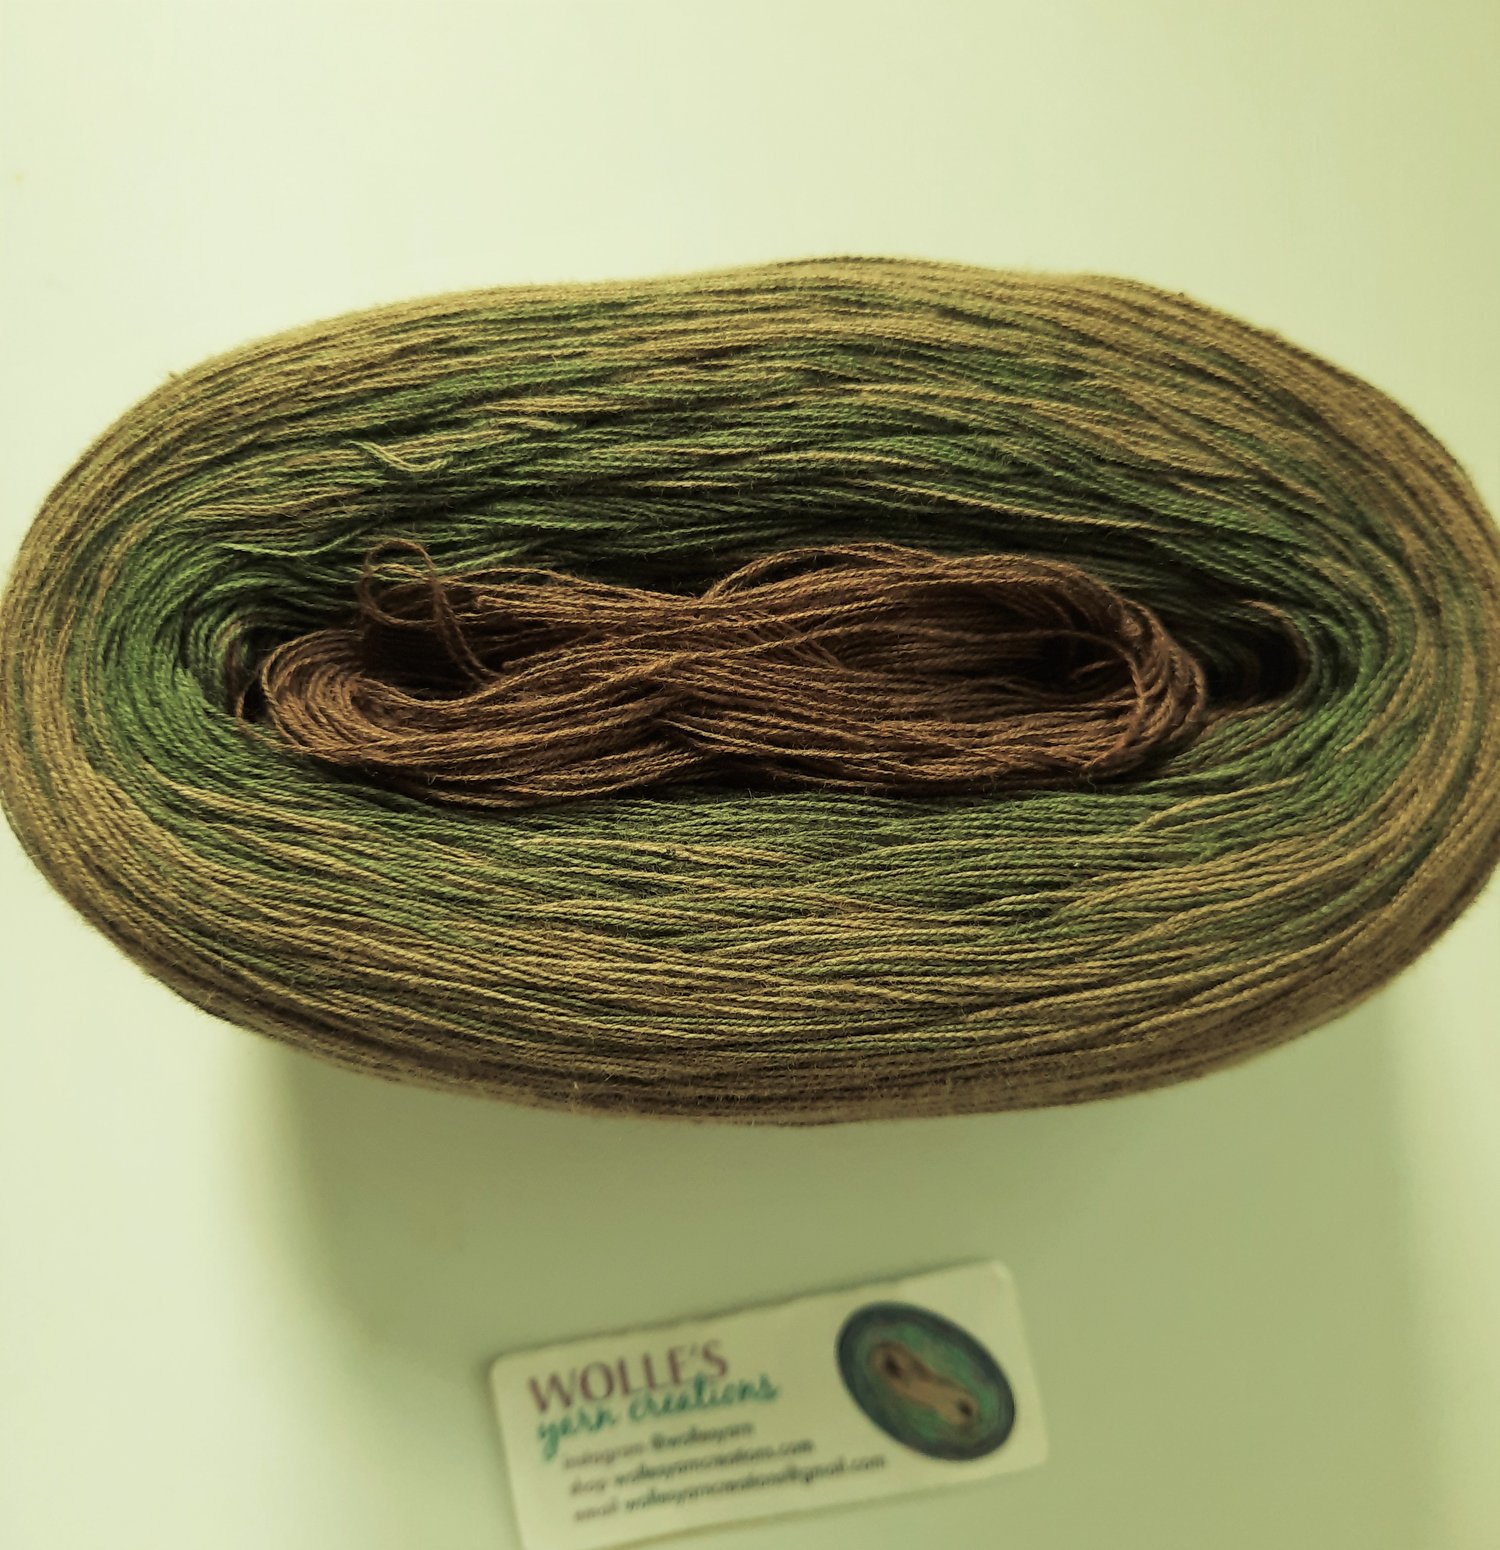 NEW WOODY, Color Changing Cotton yarn